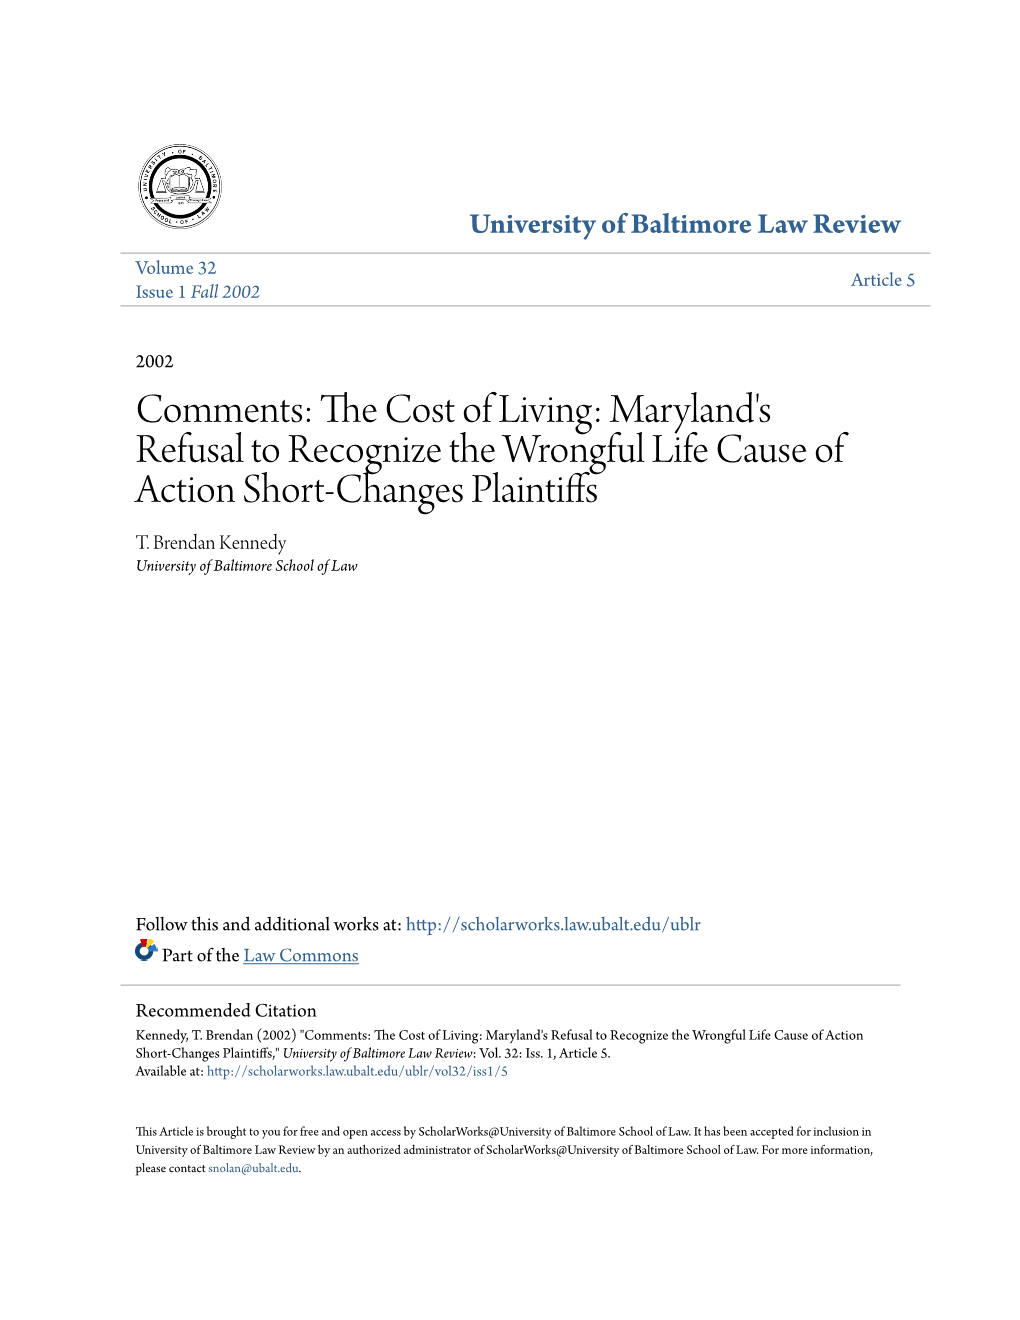 Maryland's Refusal to Recognize the Wrongful Life Cause of Action Short-Changes Plaintiffs T